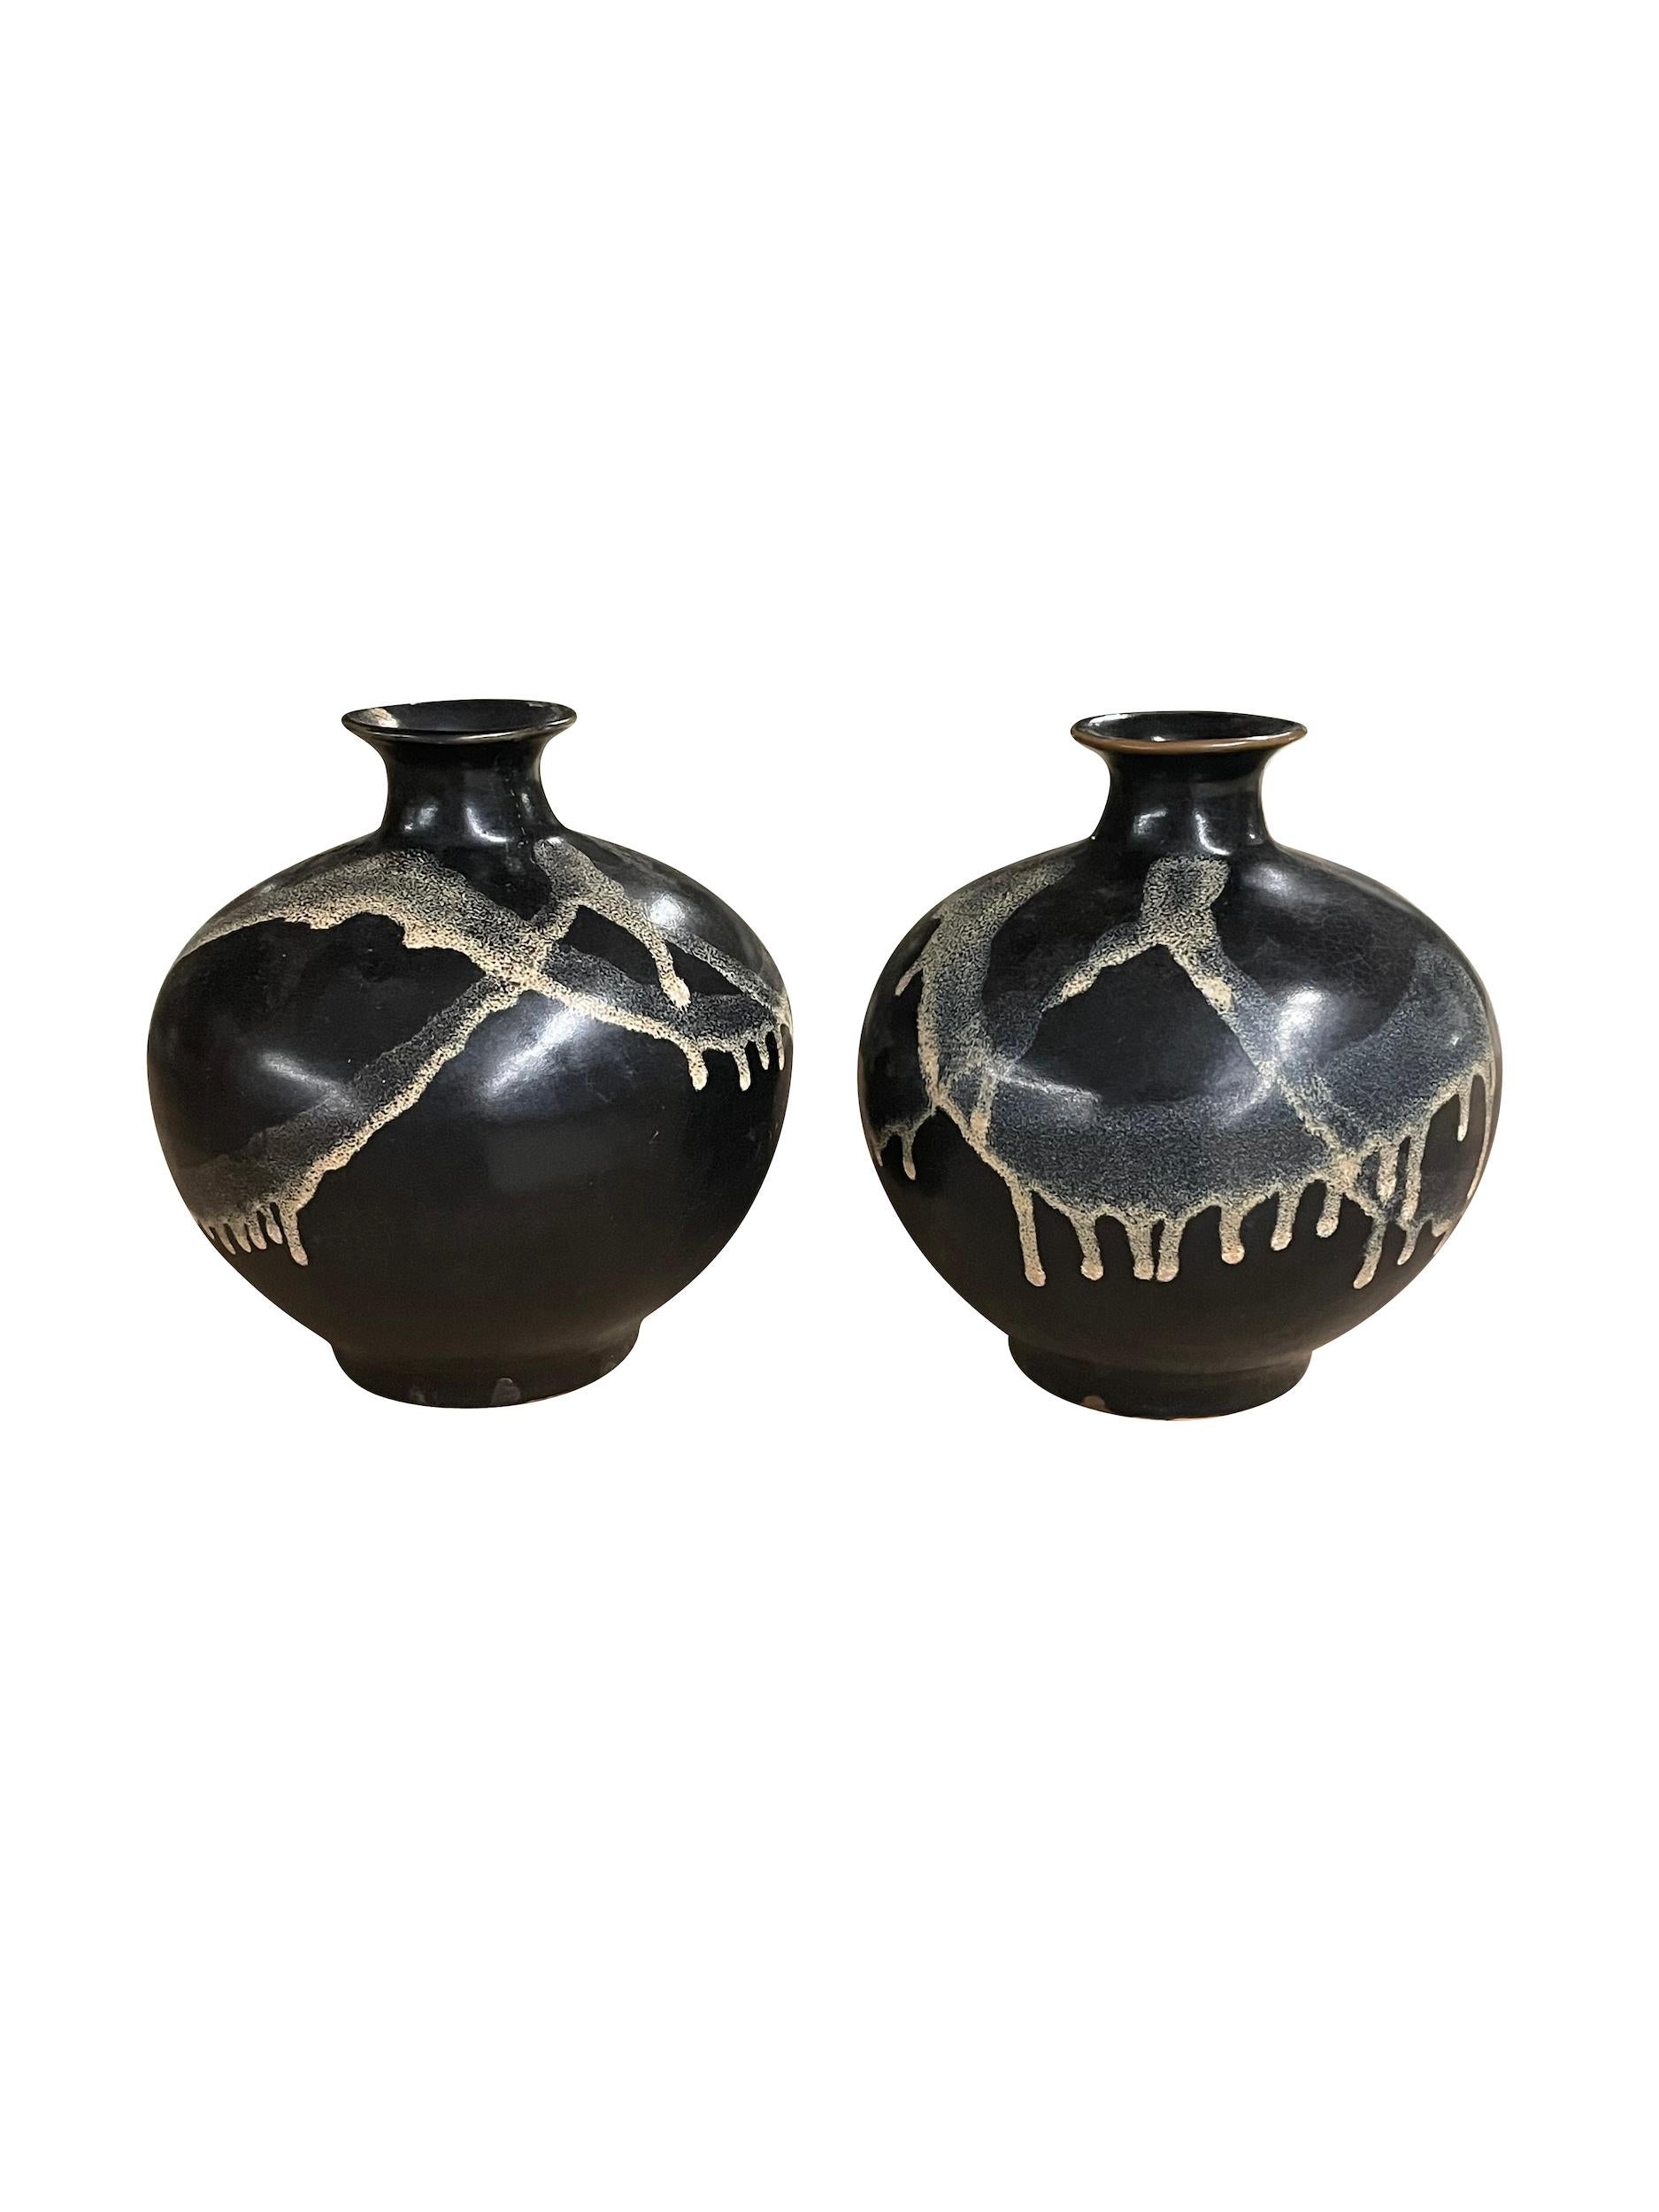 Contemporary Chinese black and cream splattered glaze vase.
Two available and sold individually.
Sets nicely with taller version S6489.
Can hold water.
ARRIVING AUGUST.